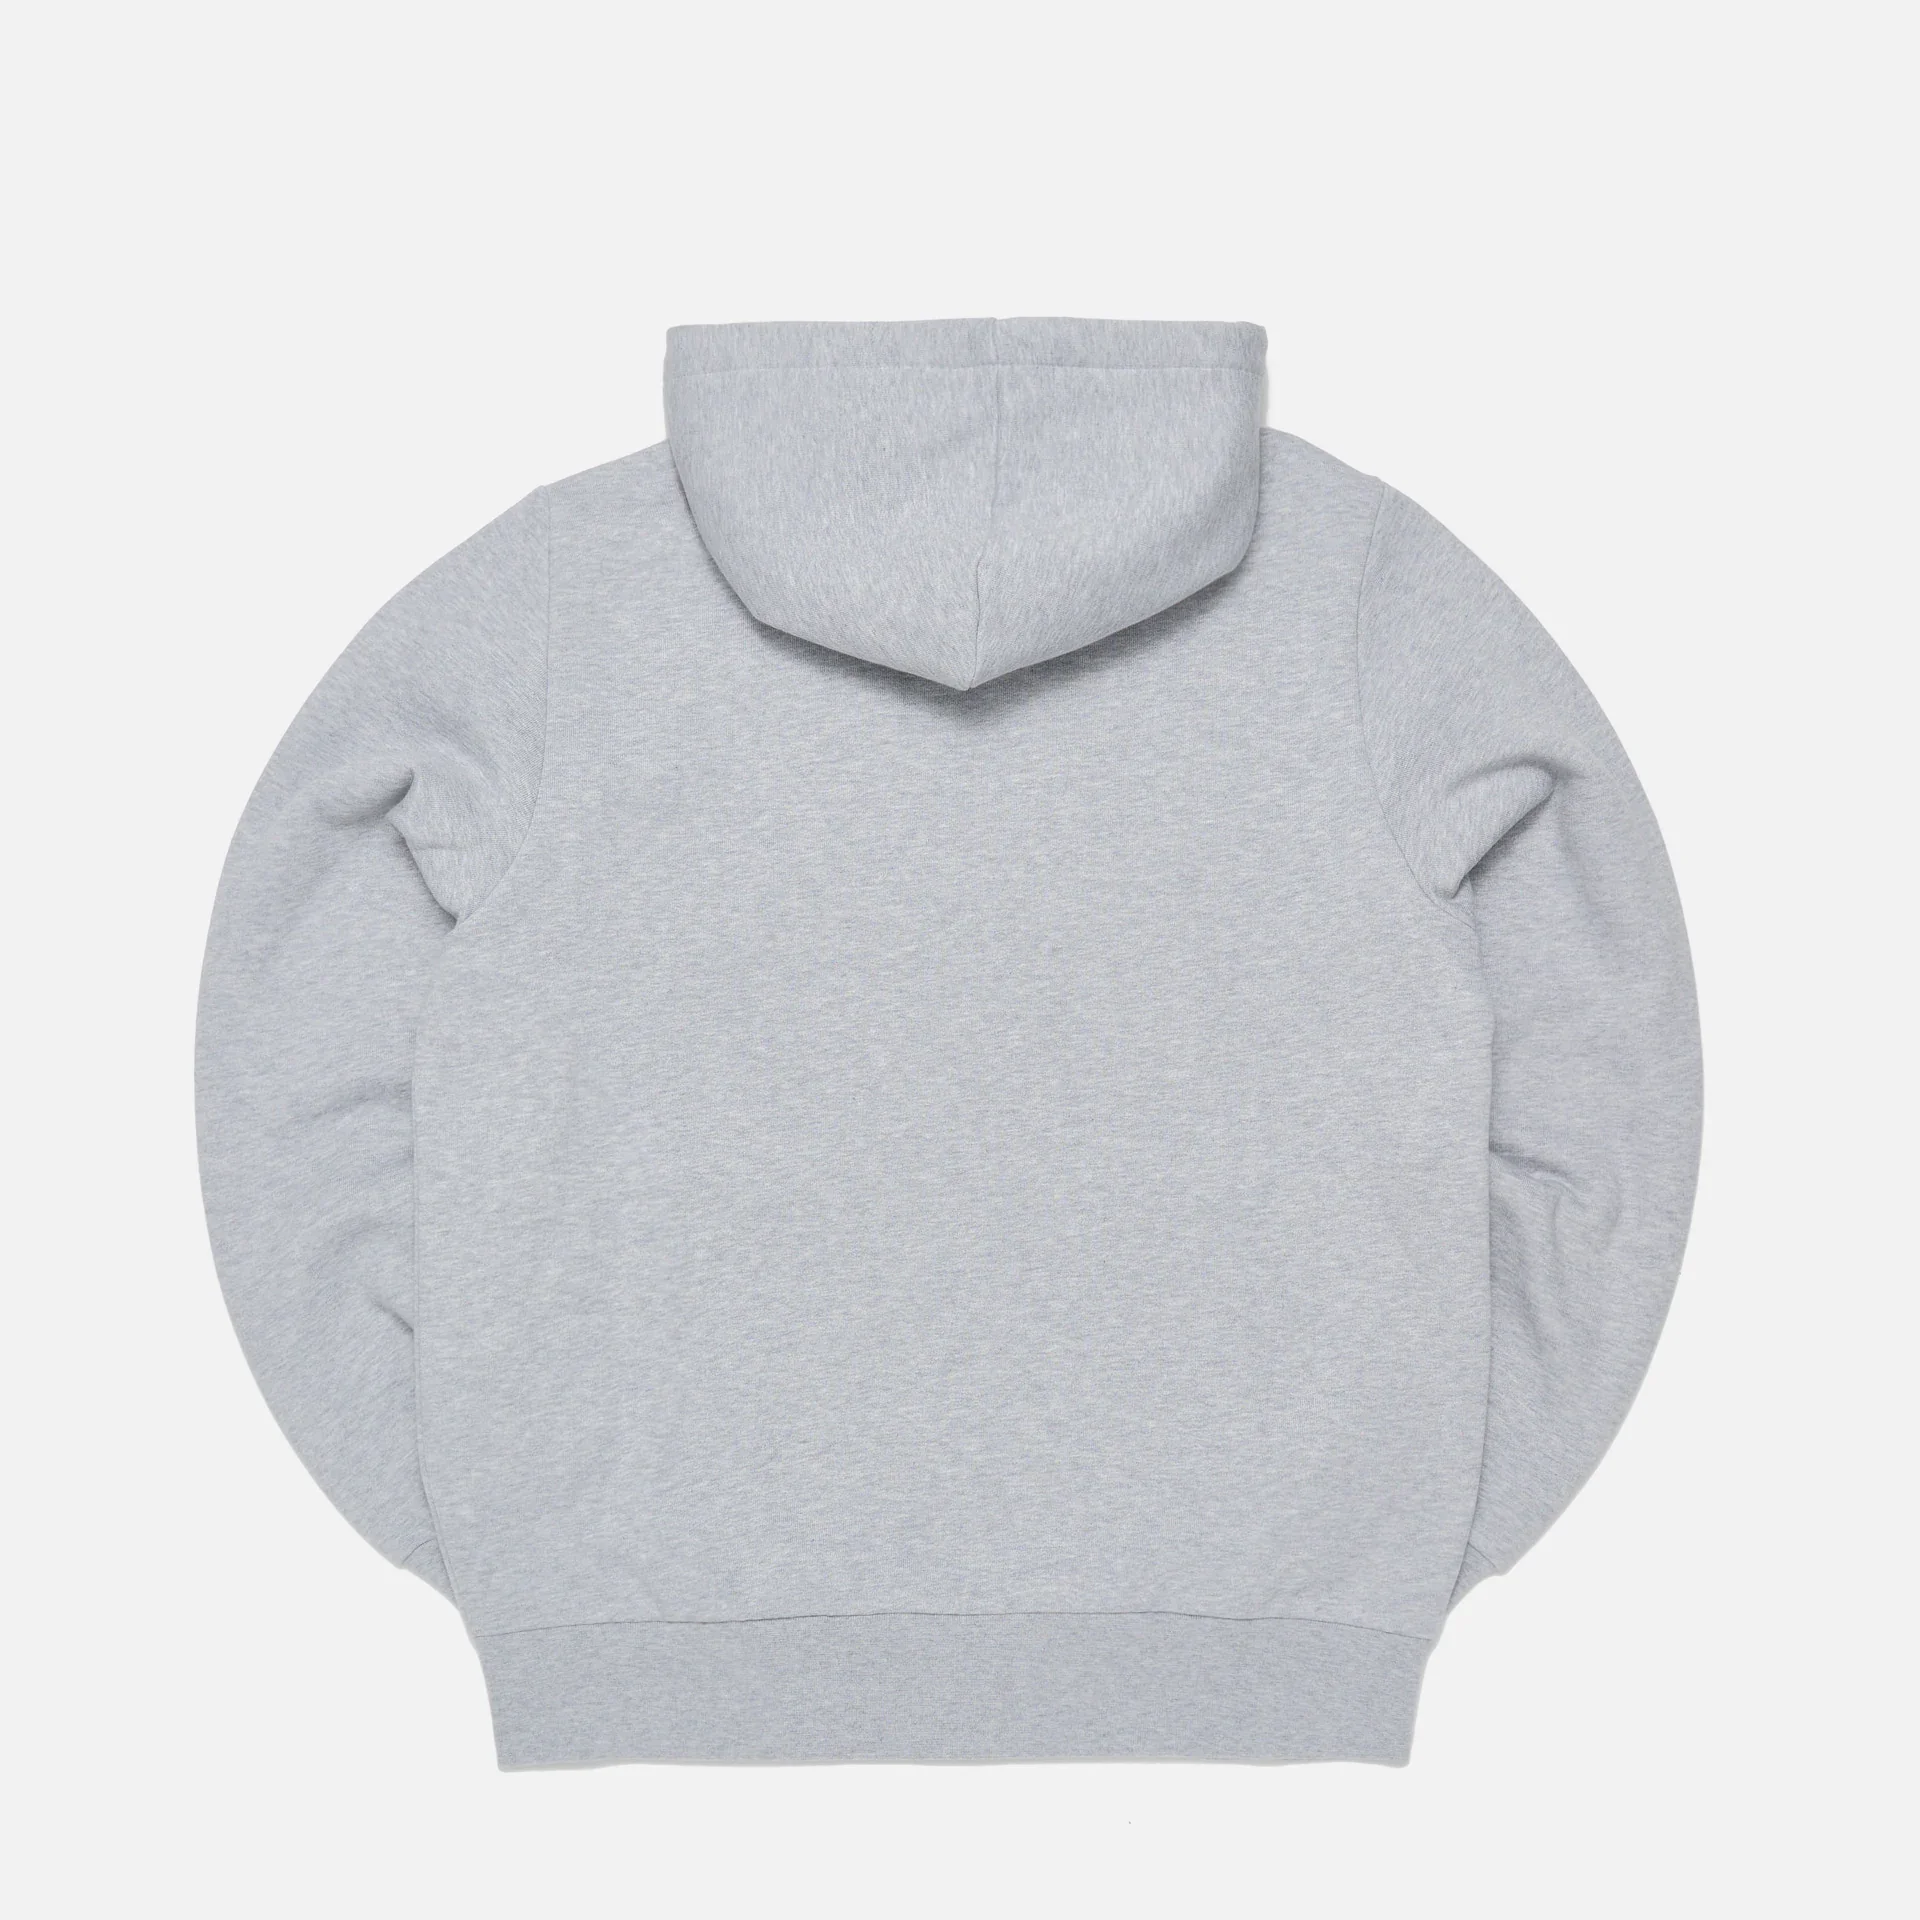 Lacoste Hooded Sweatsuit Silver Chine